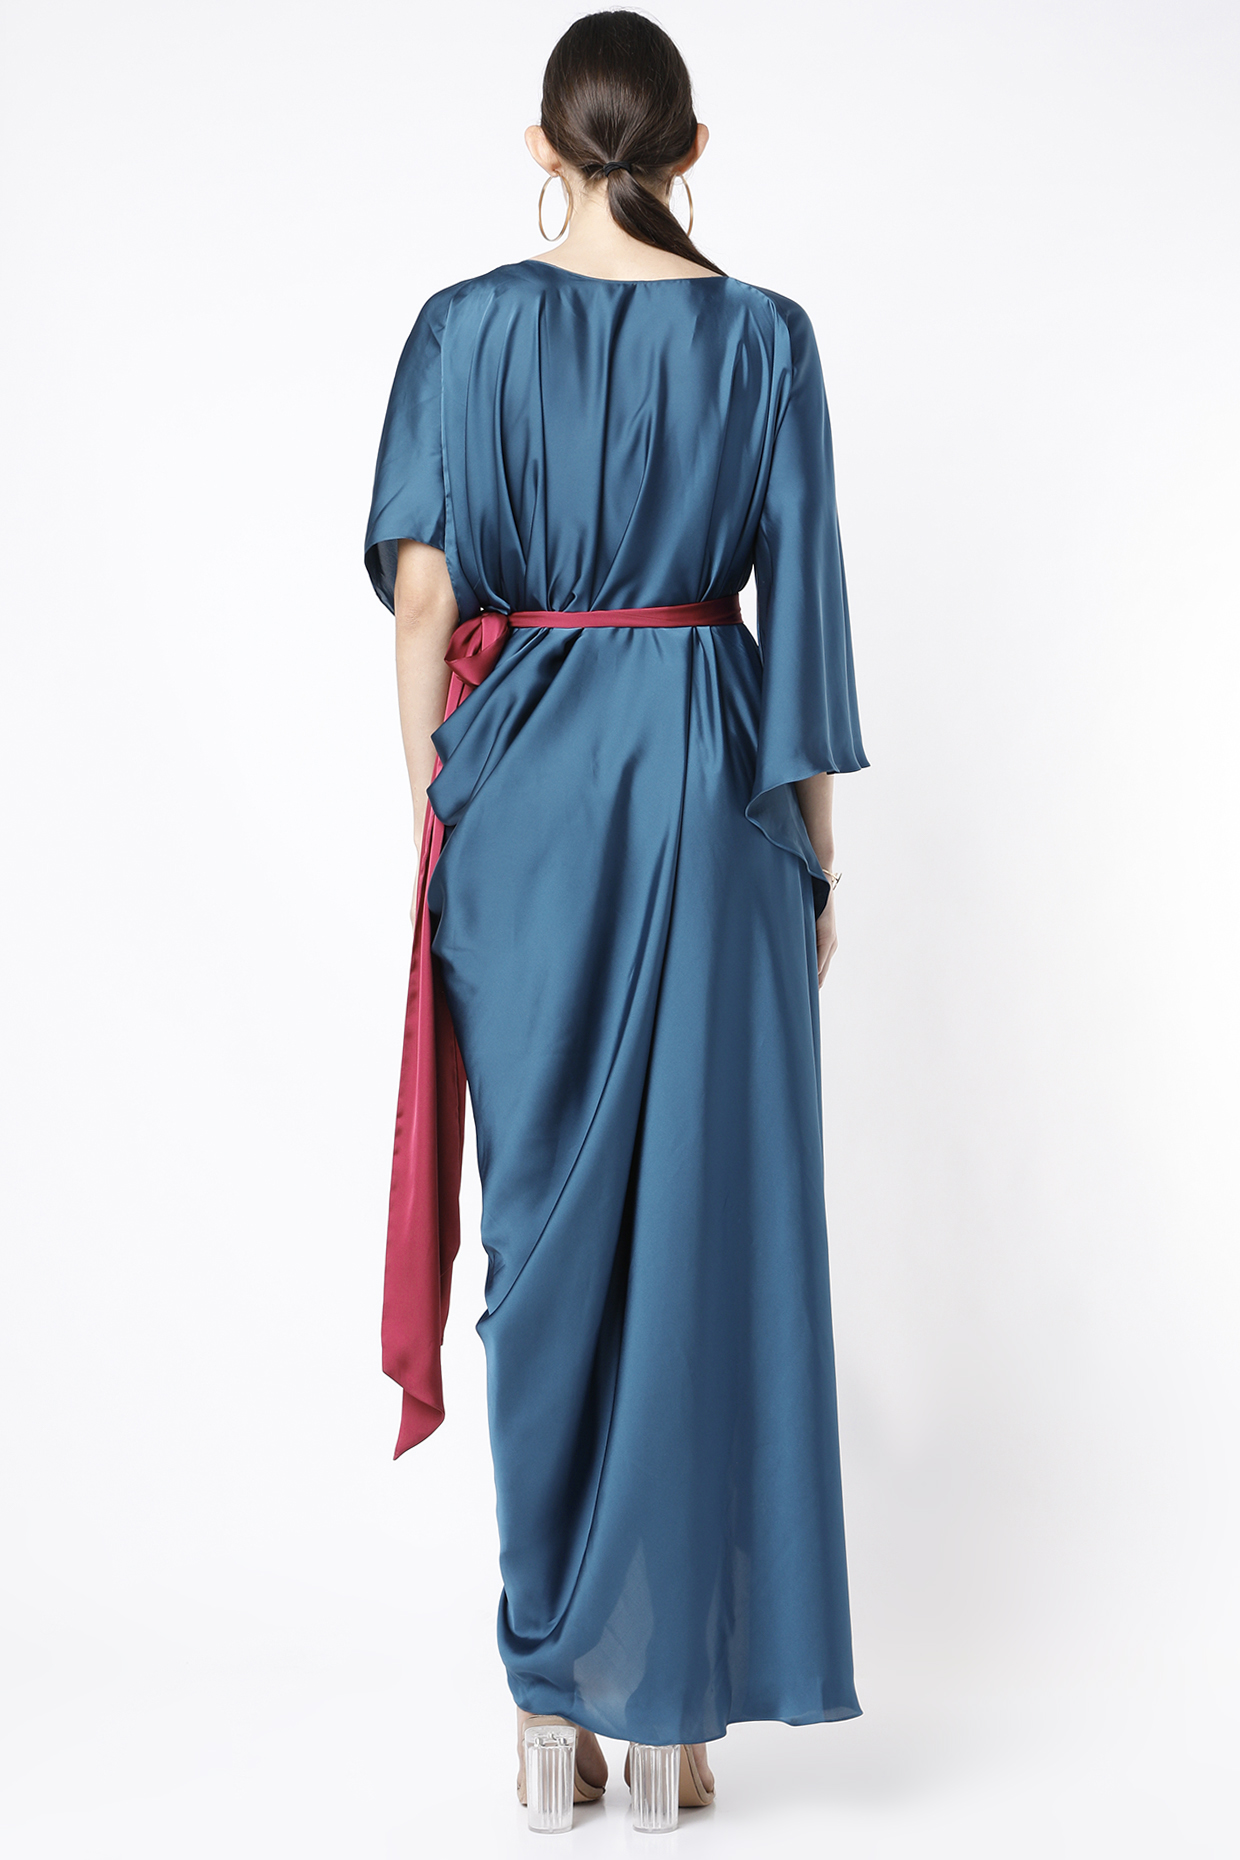 Teal Blue Draped Gown With Contrasting Sash